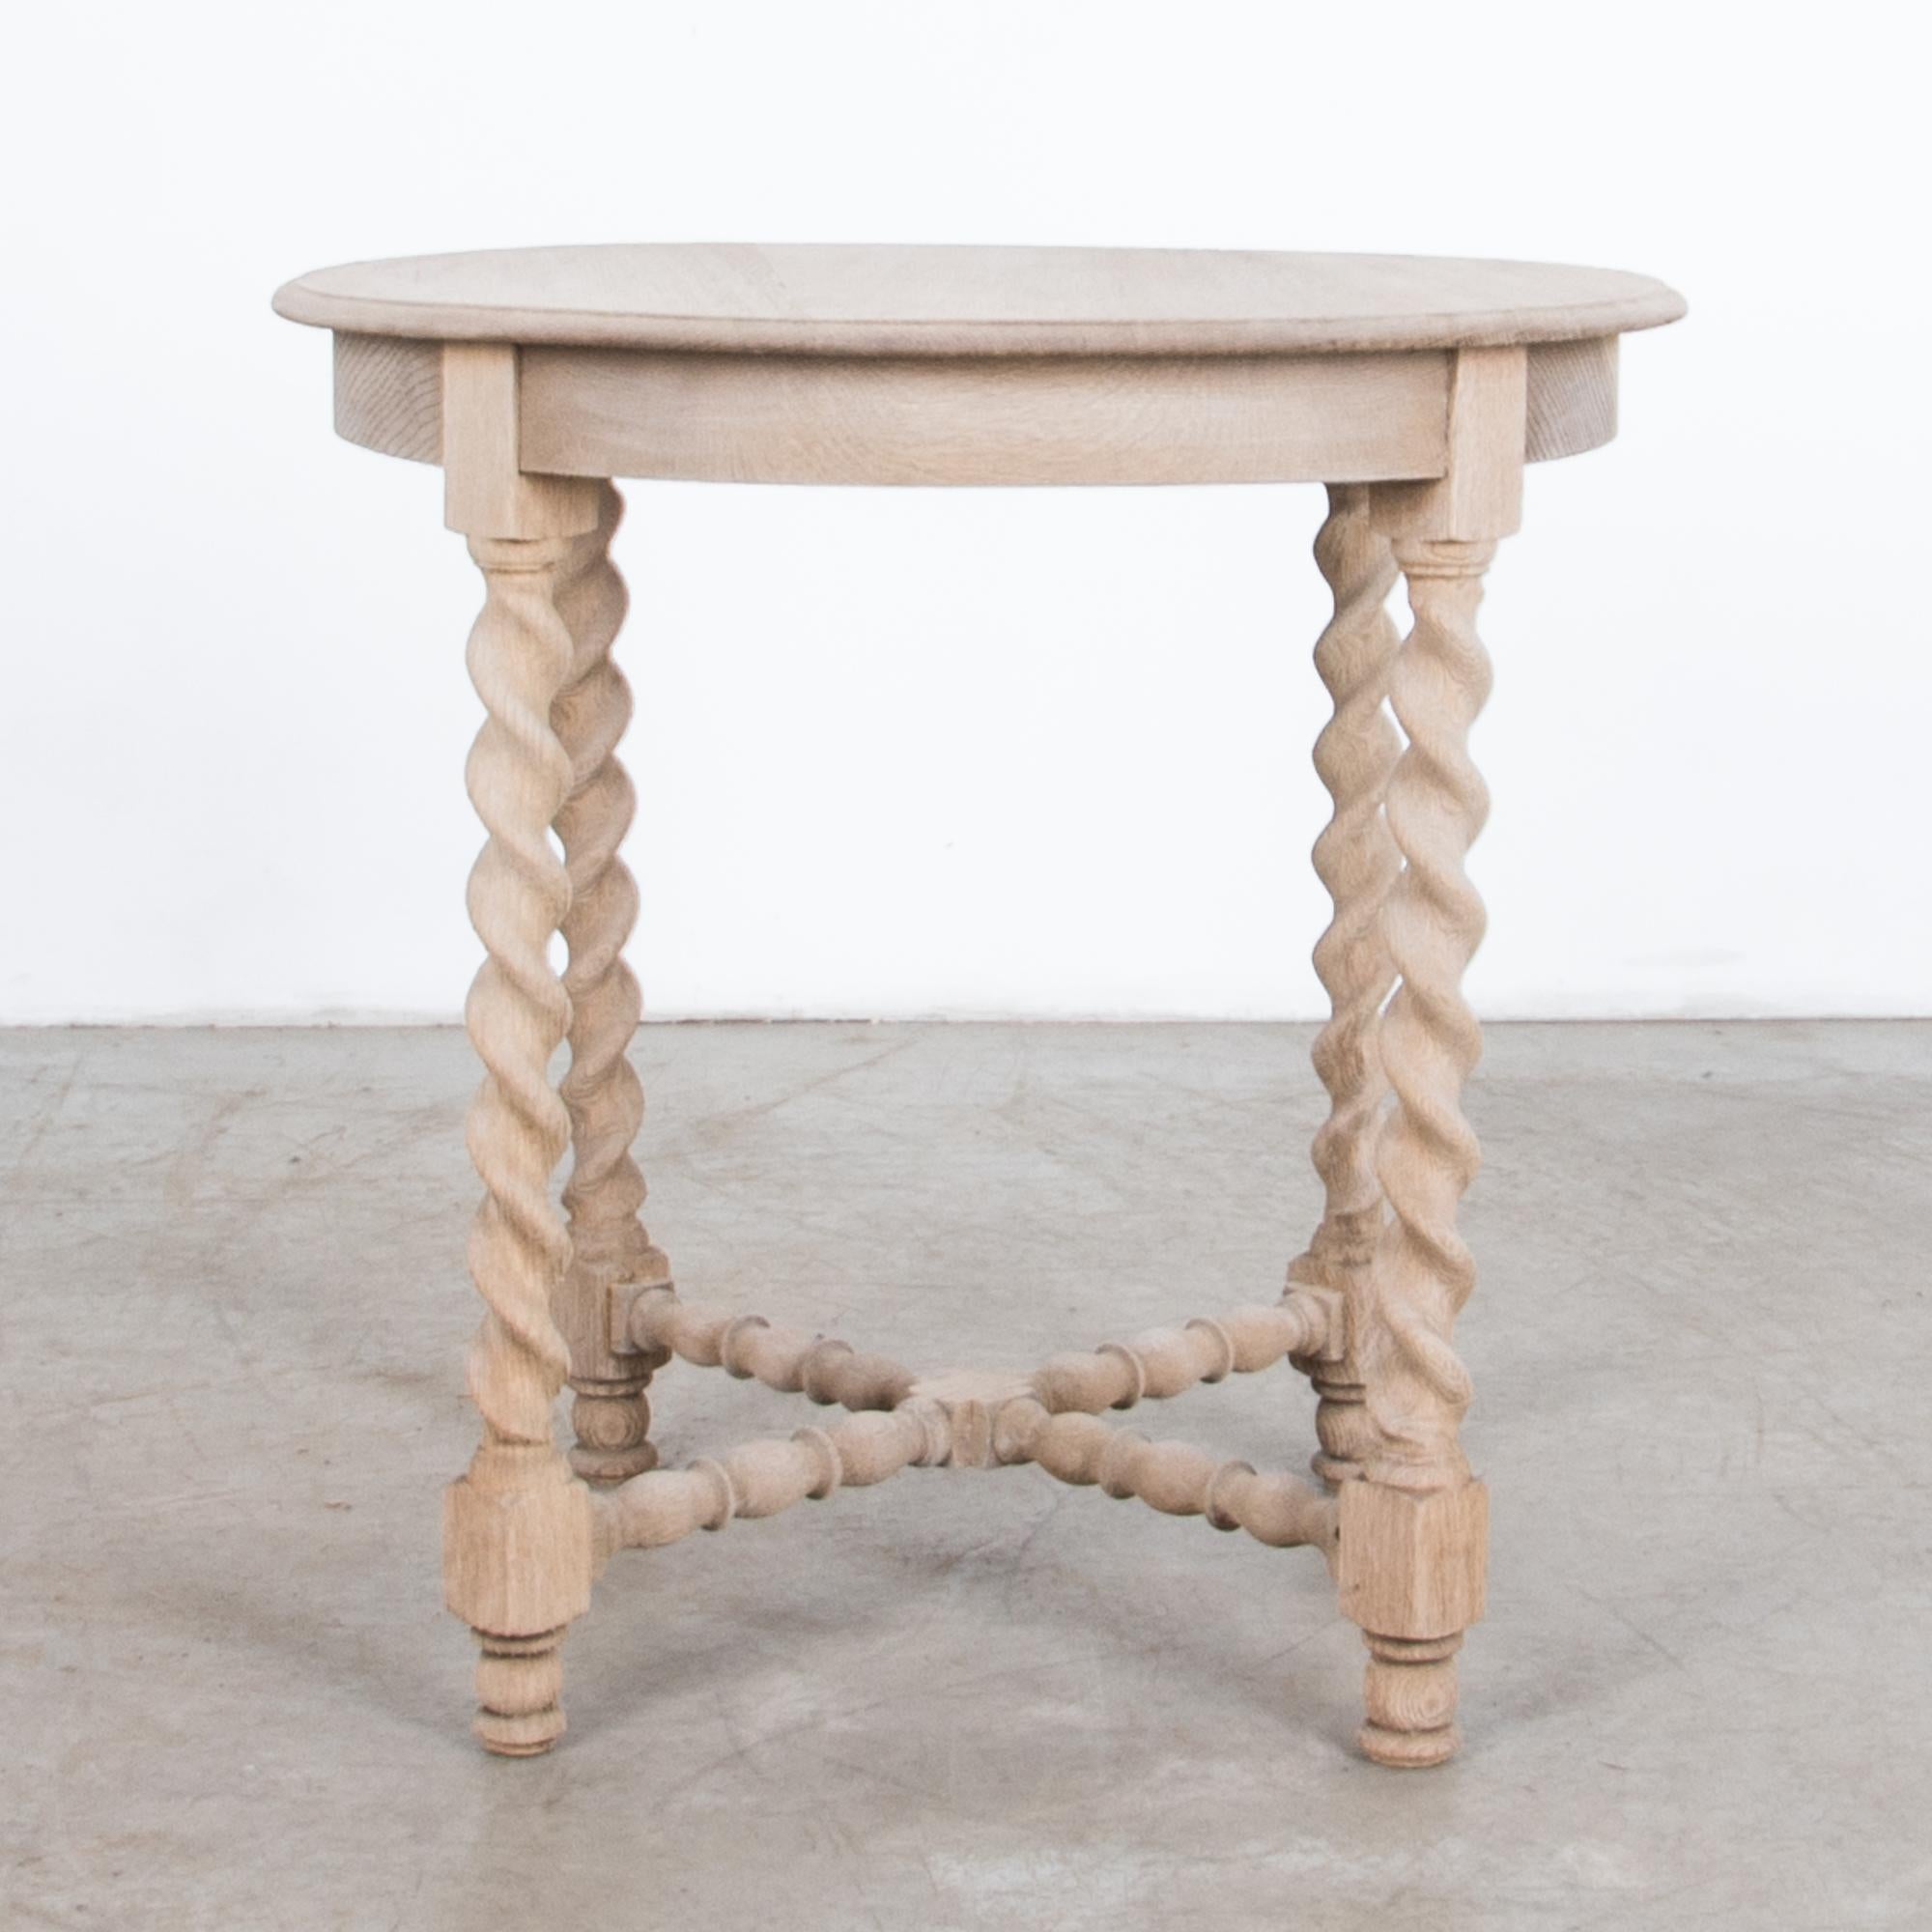 From France circa 1920, an oak side table with circular top. Carved in oak, this French Provincial table is simple and elegant, twisted barley columns recall the agrarian traditions of its countryside origin.